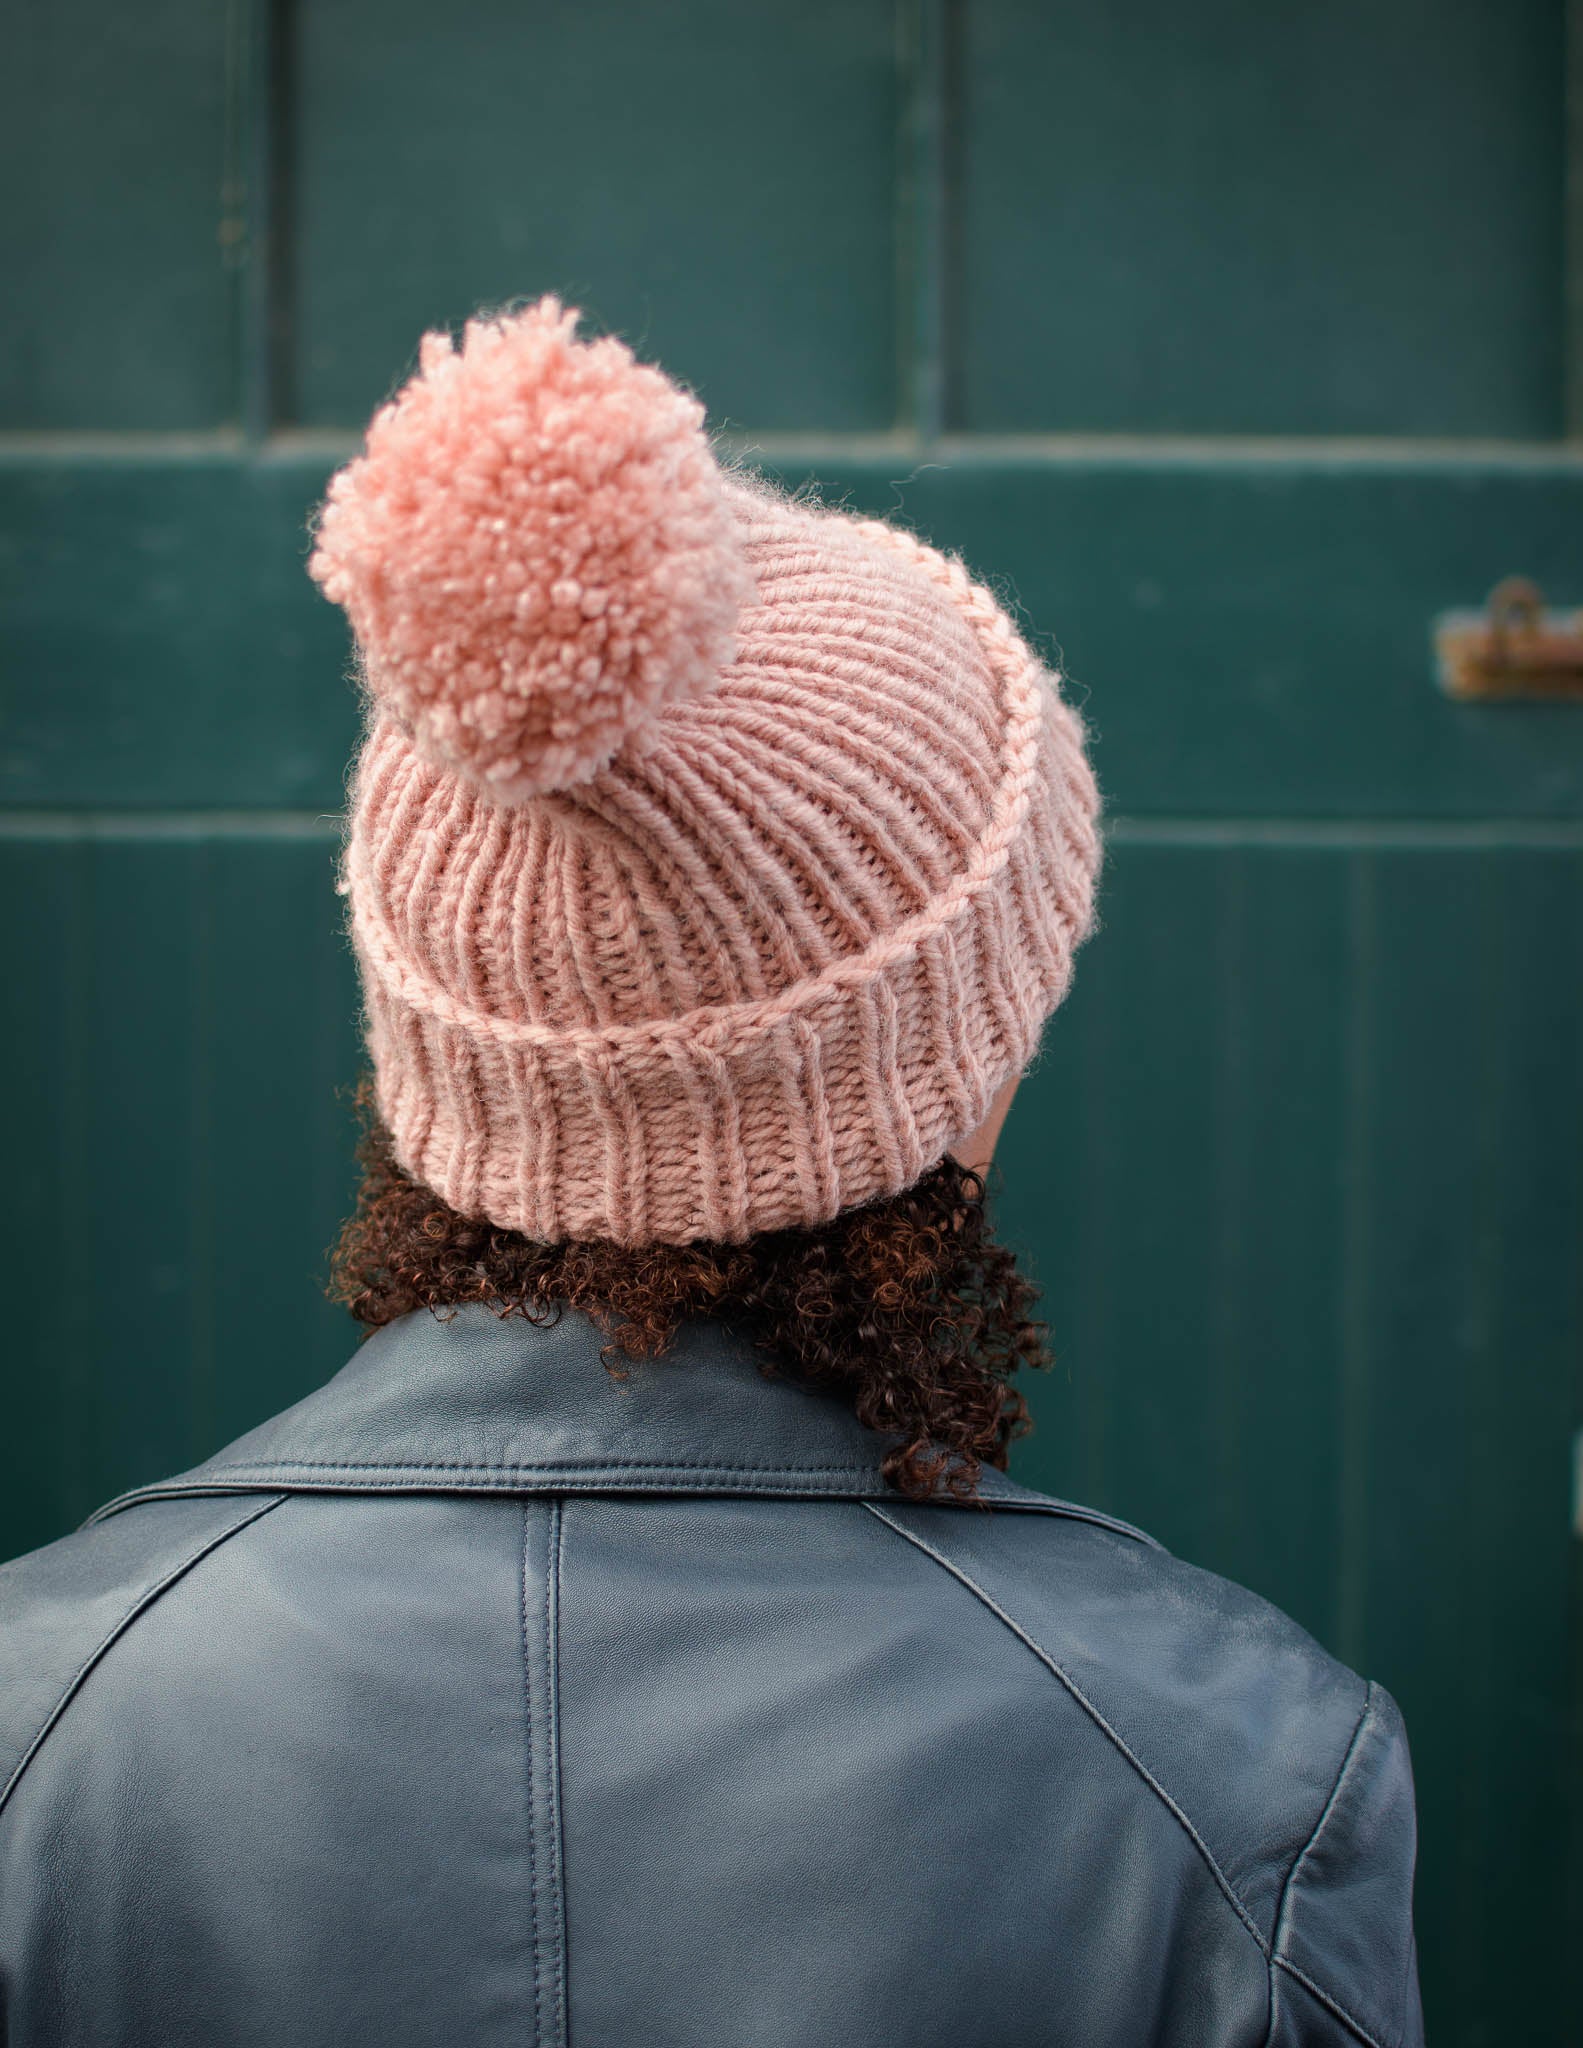 Knitting Swatchless Hats: Mini-course - Ysolda